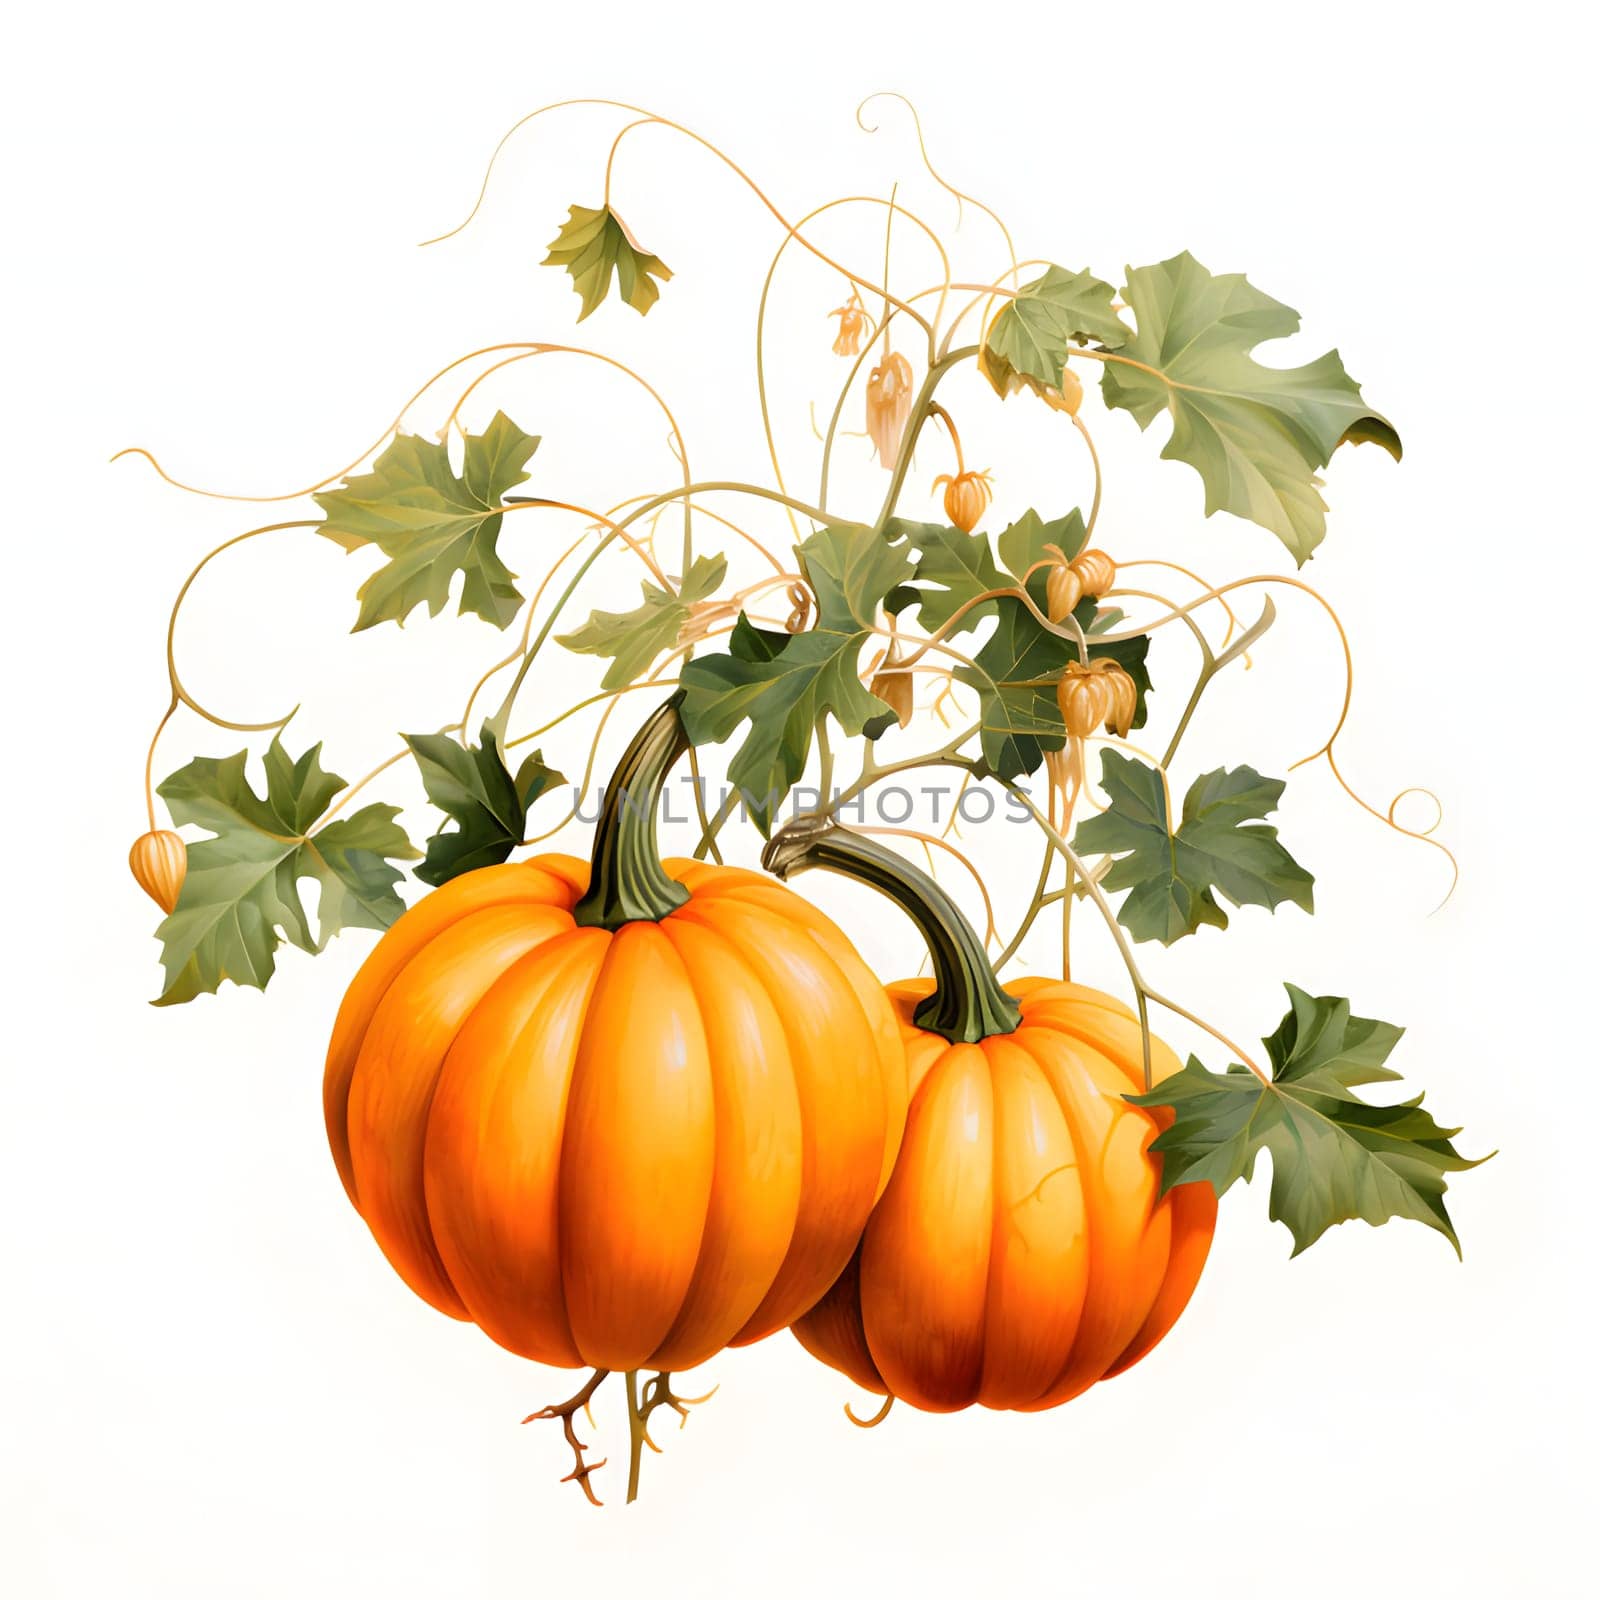 Pumpkins and leaves. Pumpkin as a dish of thanksgiving for the harvest, picture on a white isolated background. by ThemesS